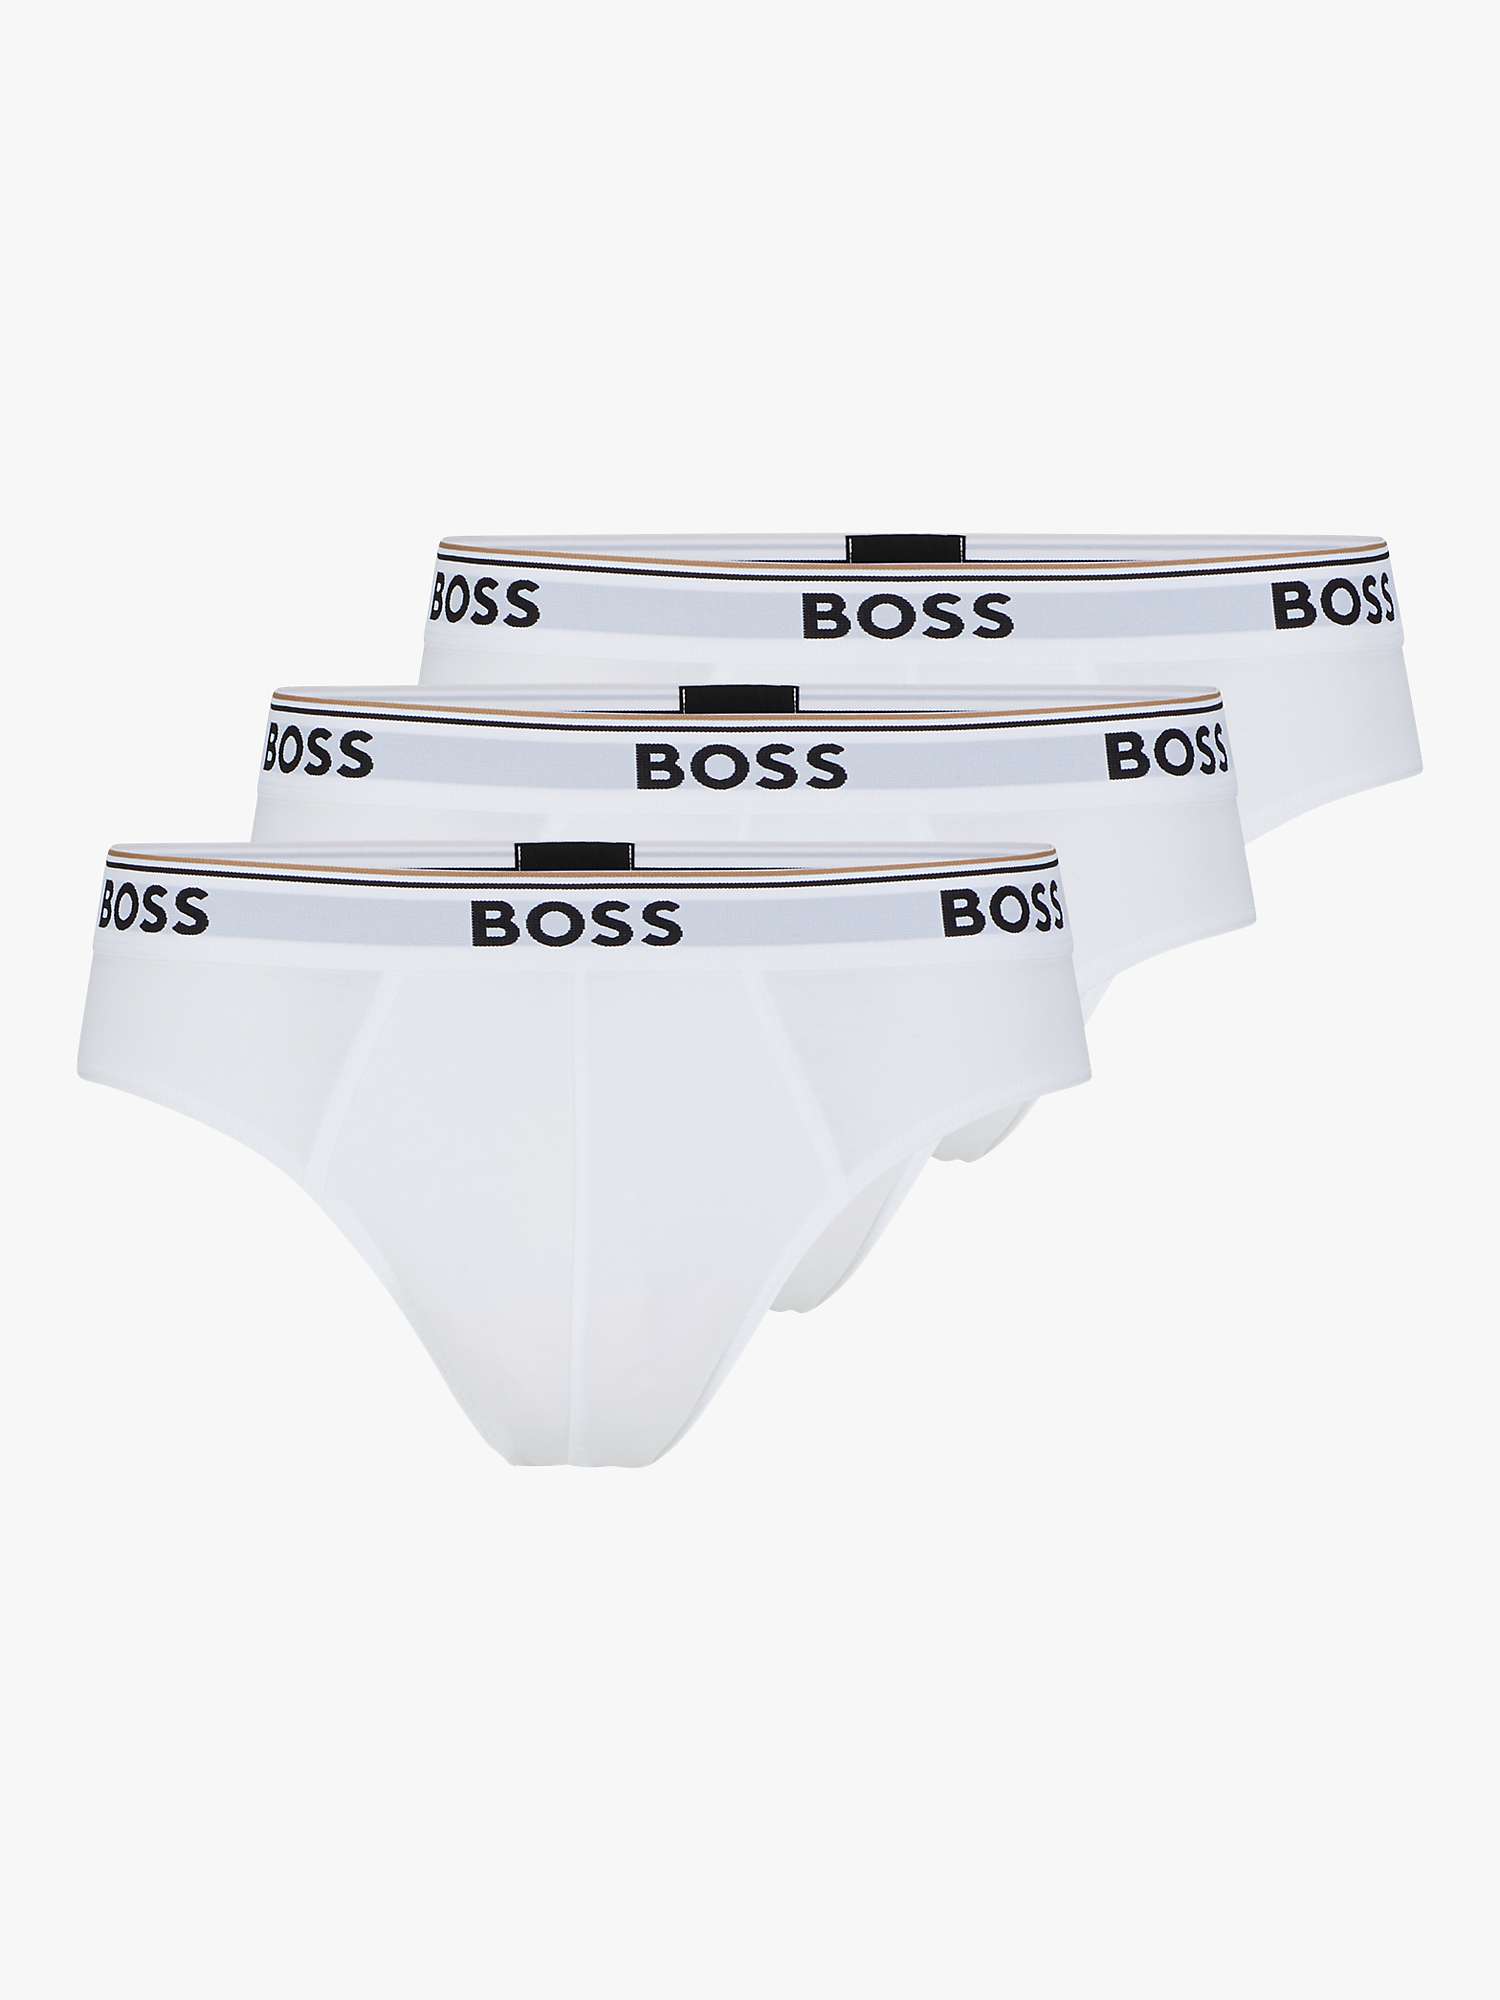 Buy BOSS Stretch Power Briefs, Pack of 3 Online at johnlewis.com